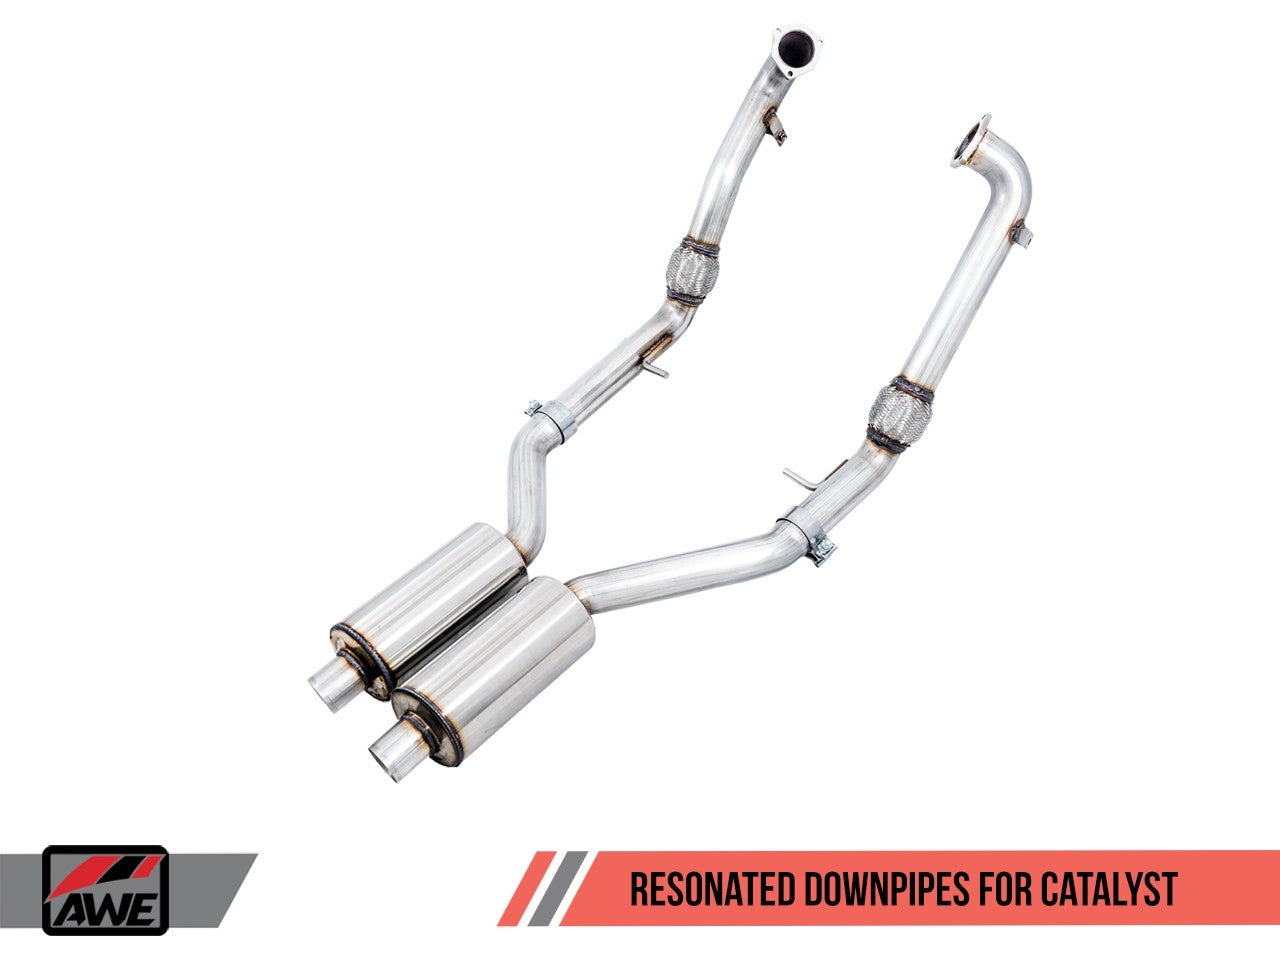 AWE Track Edition Exhaust for B9 S5 Coupe - Resonated for Performance Catalyst - Motorsports LA